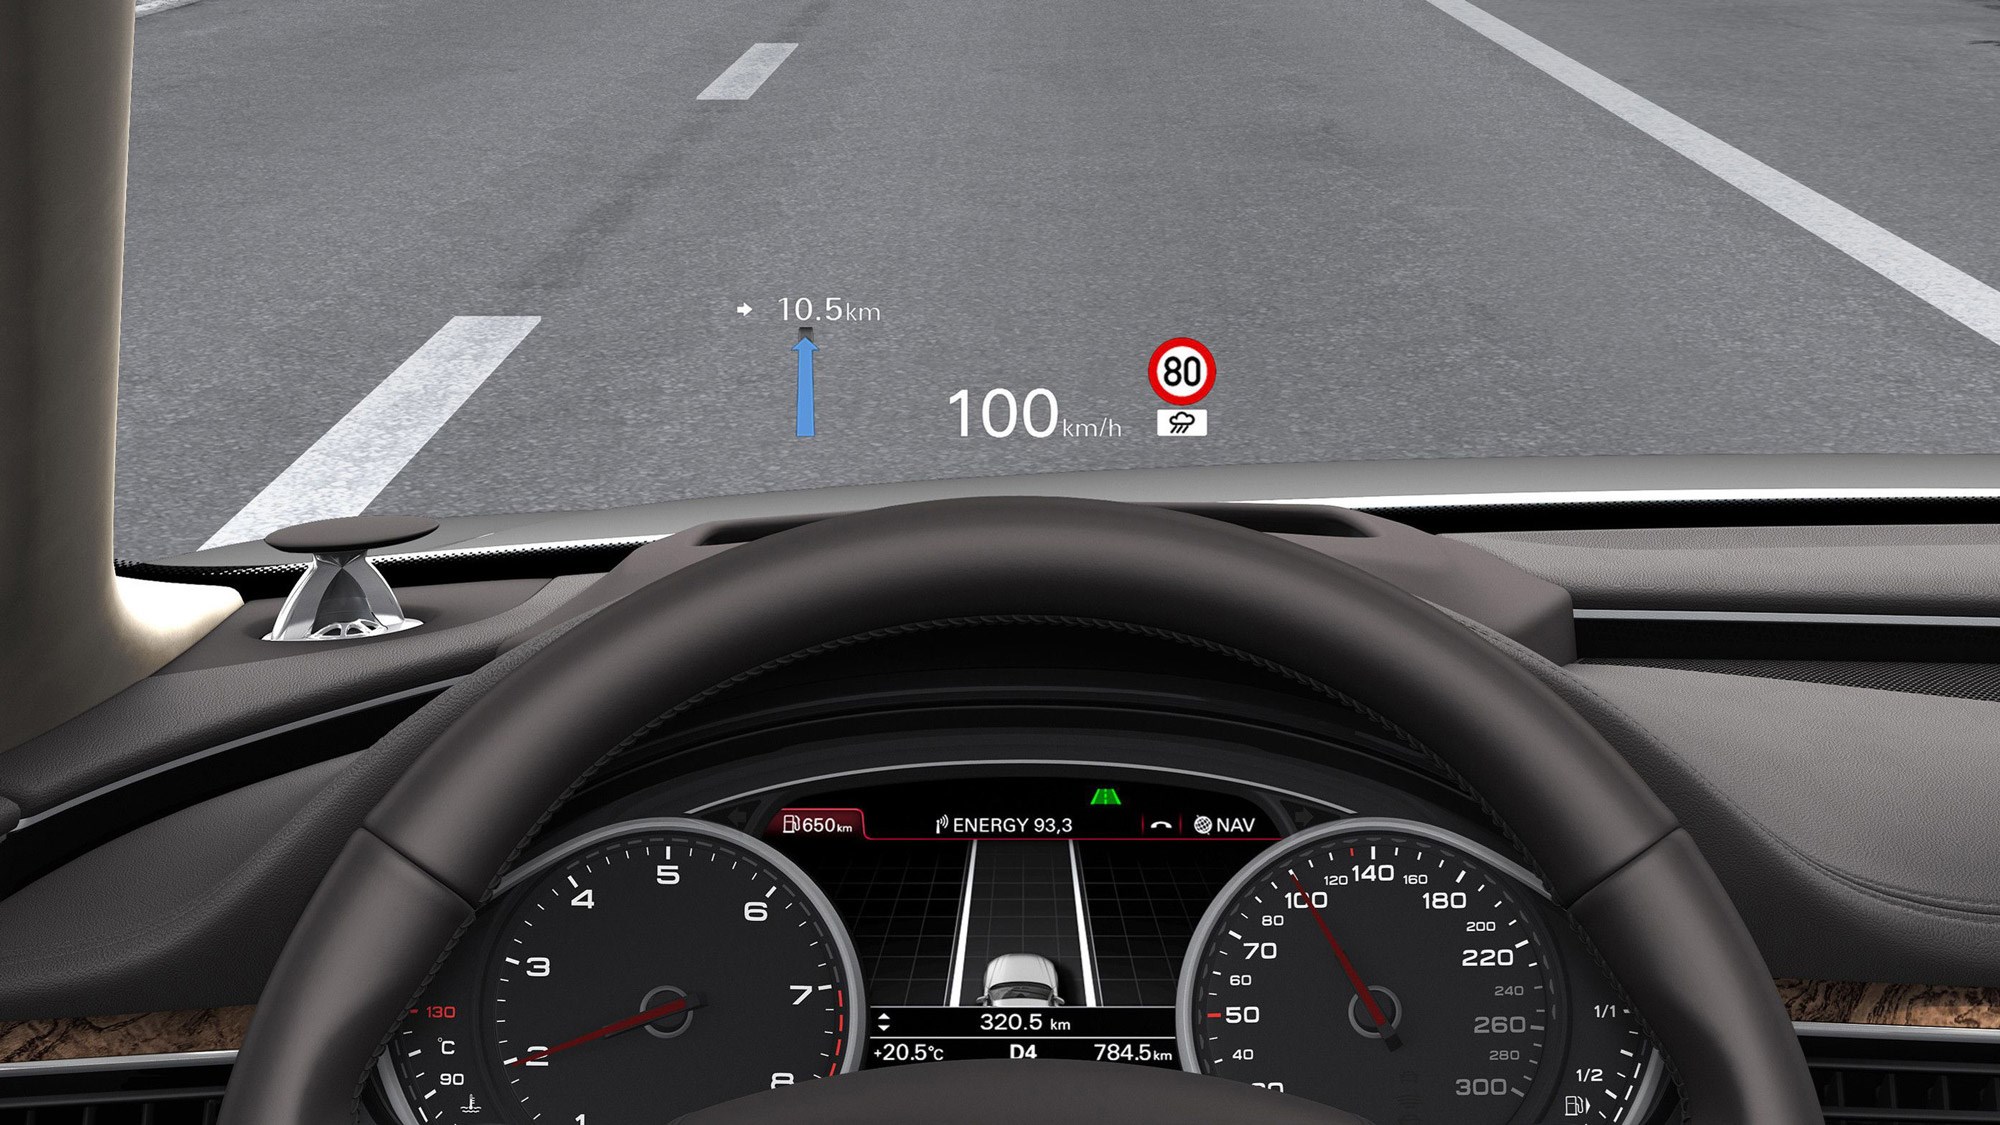 Head-up displays: What are they?